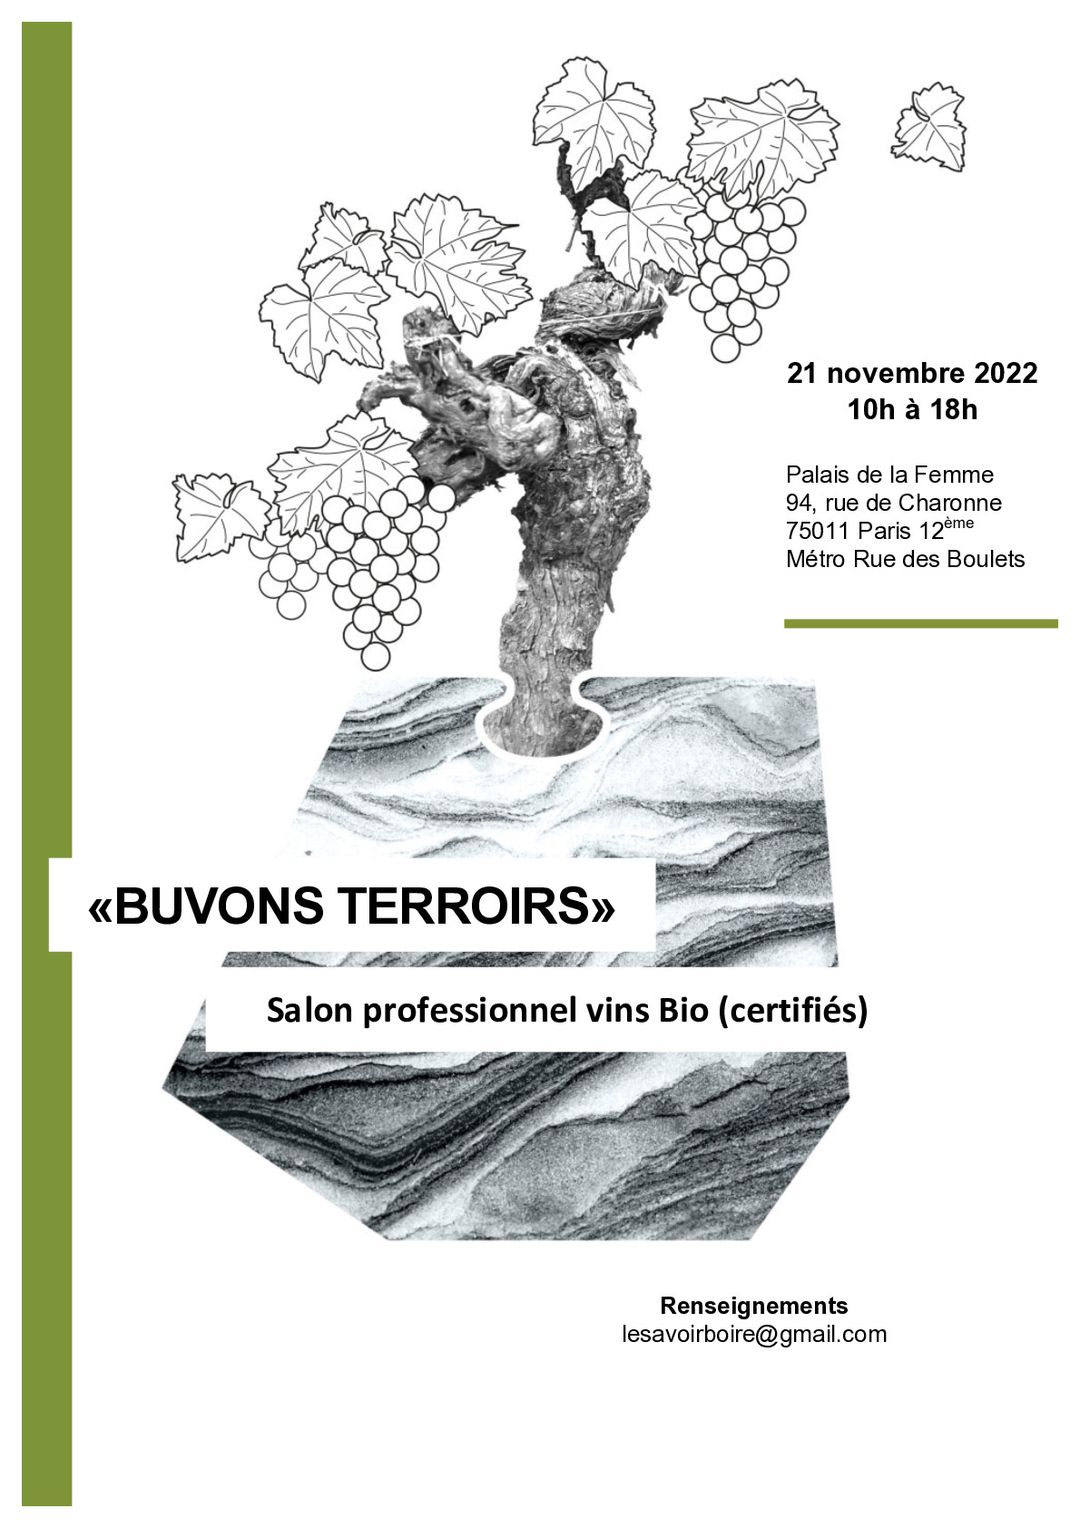 Buvons TerroirS, on aime !